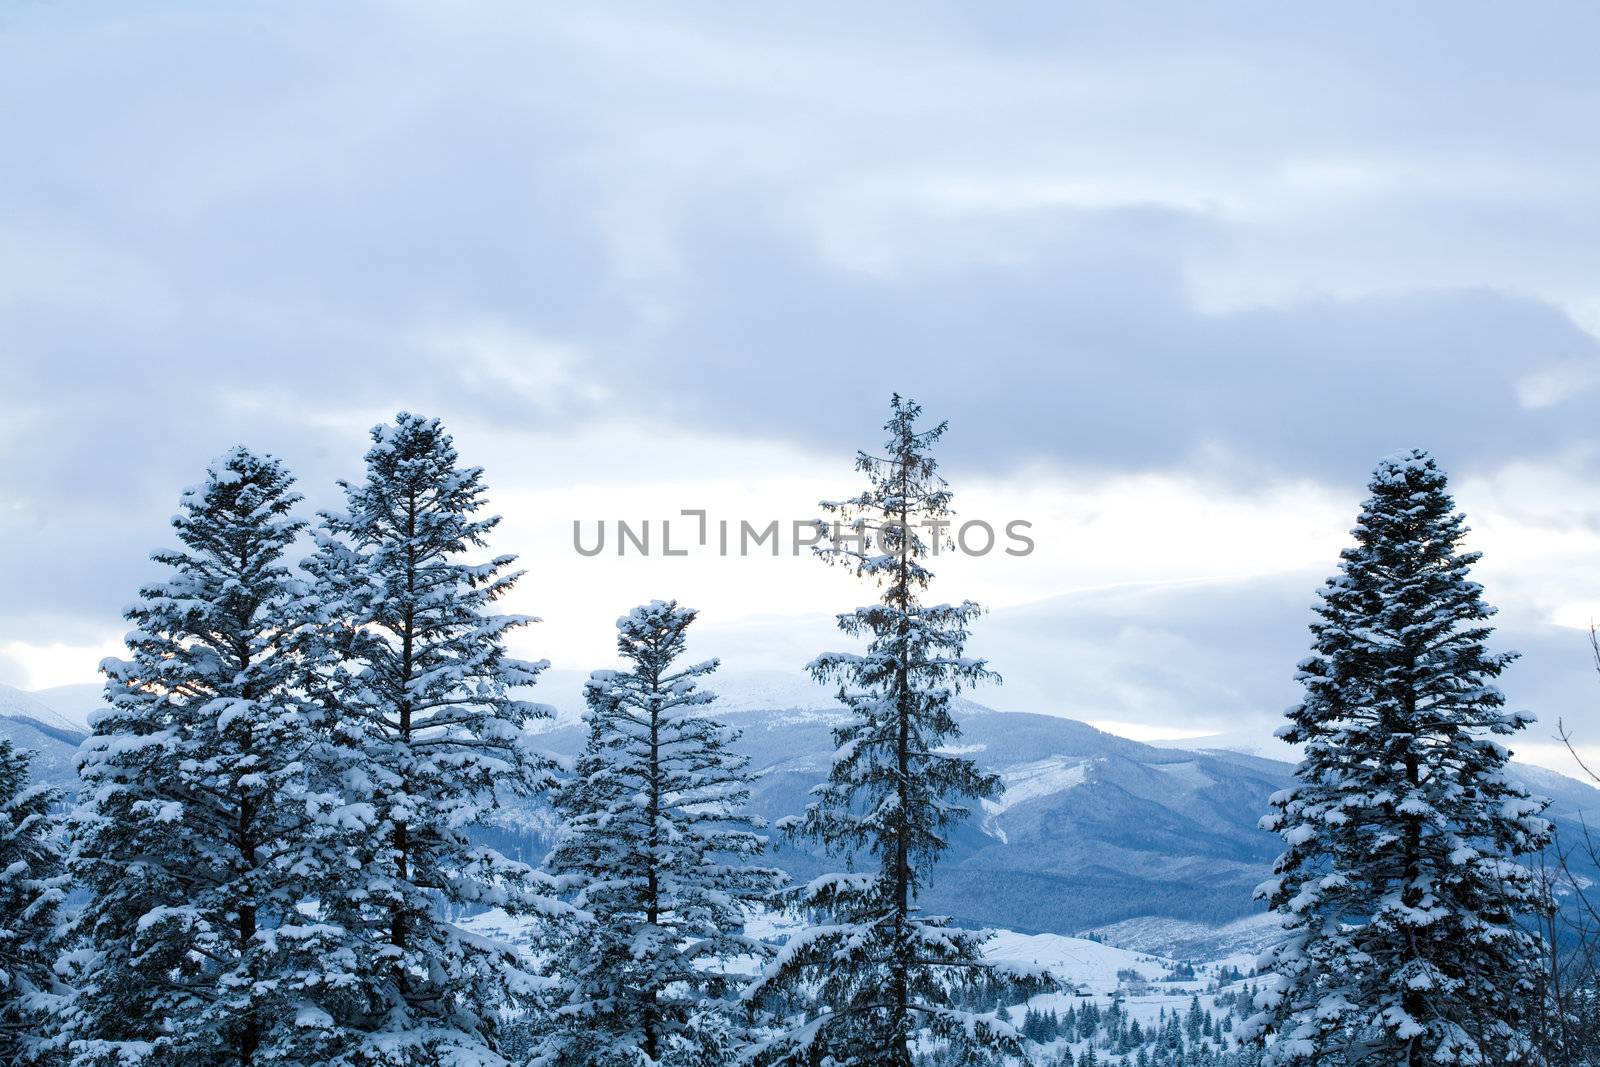 An image of cold winter in the mountains